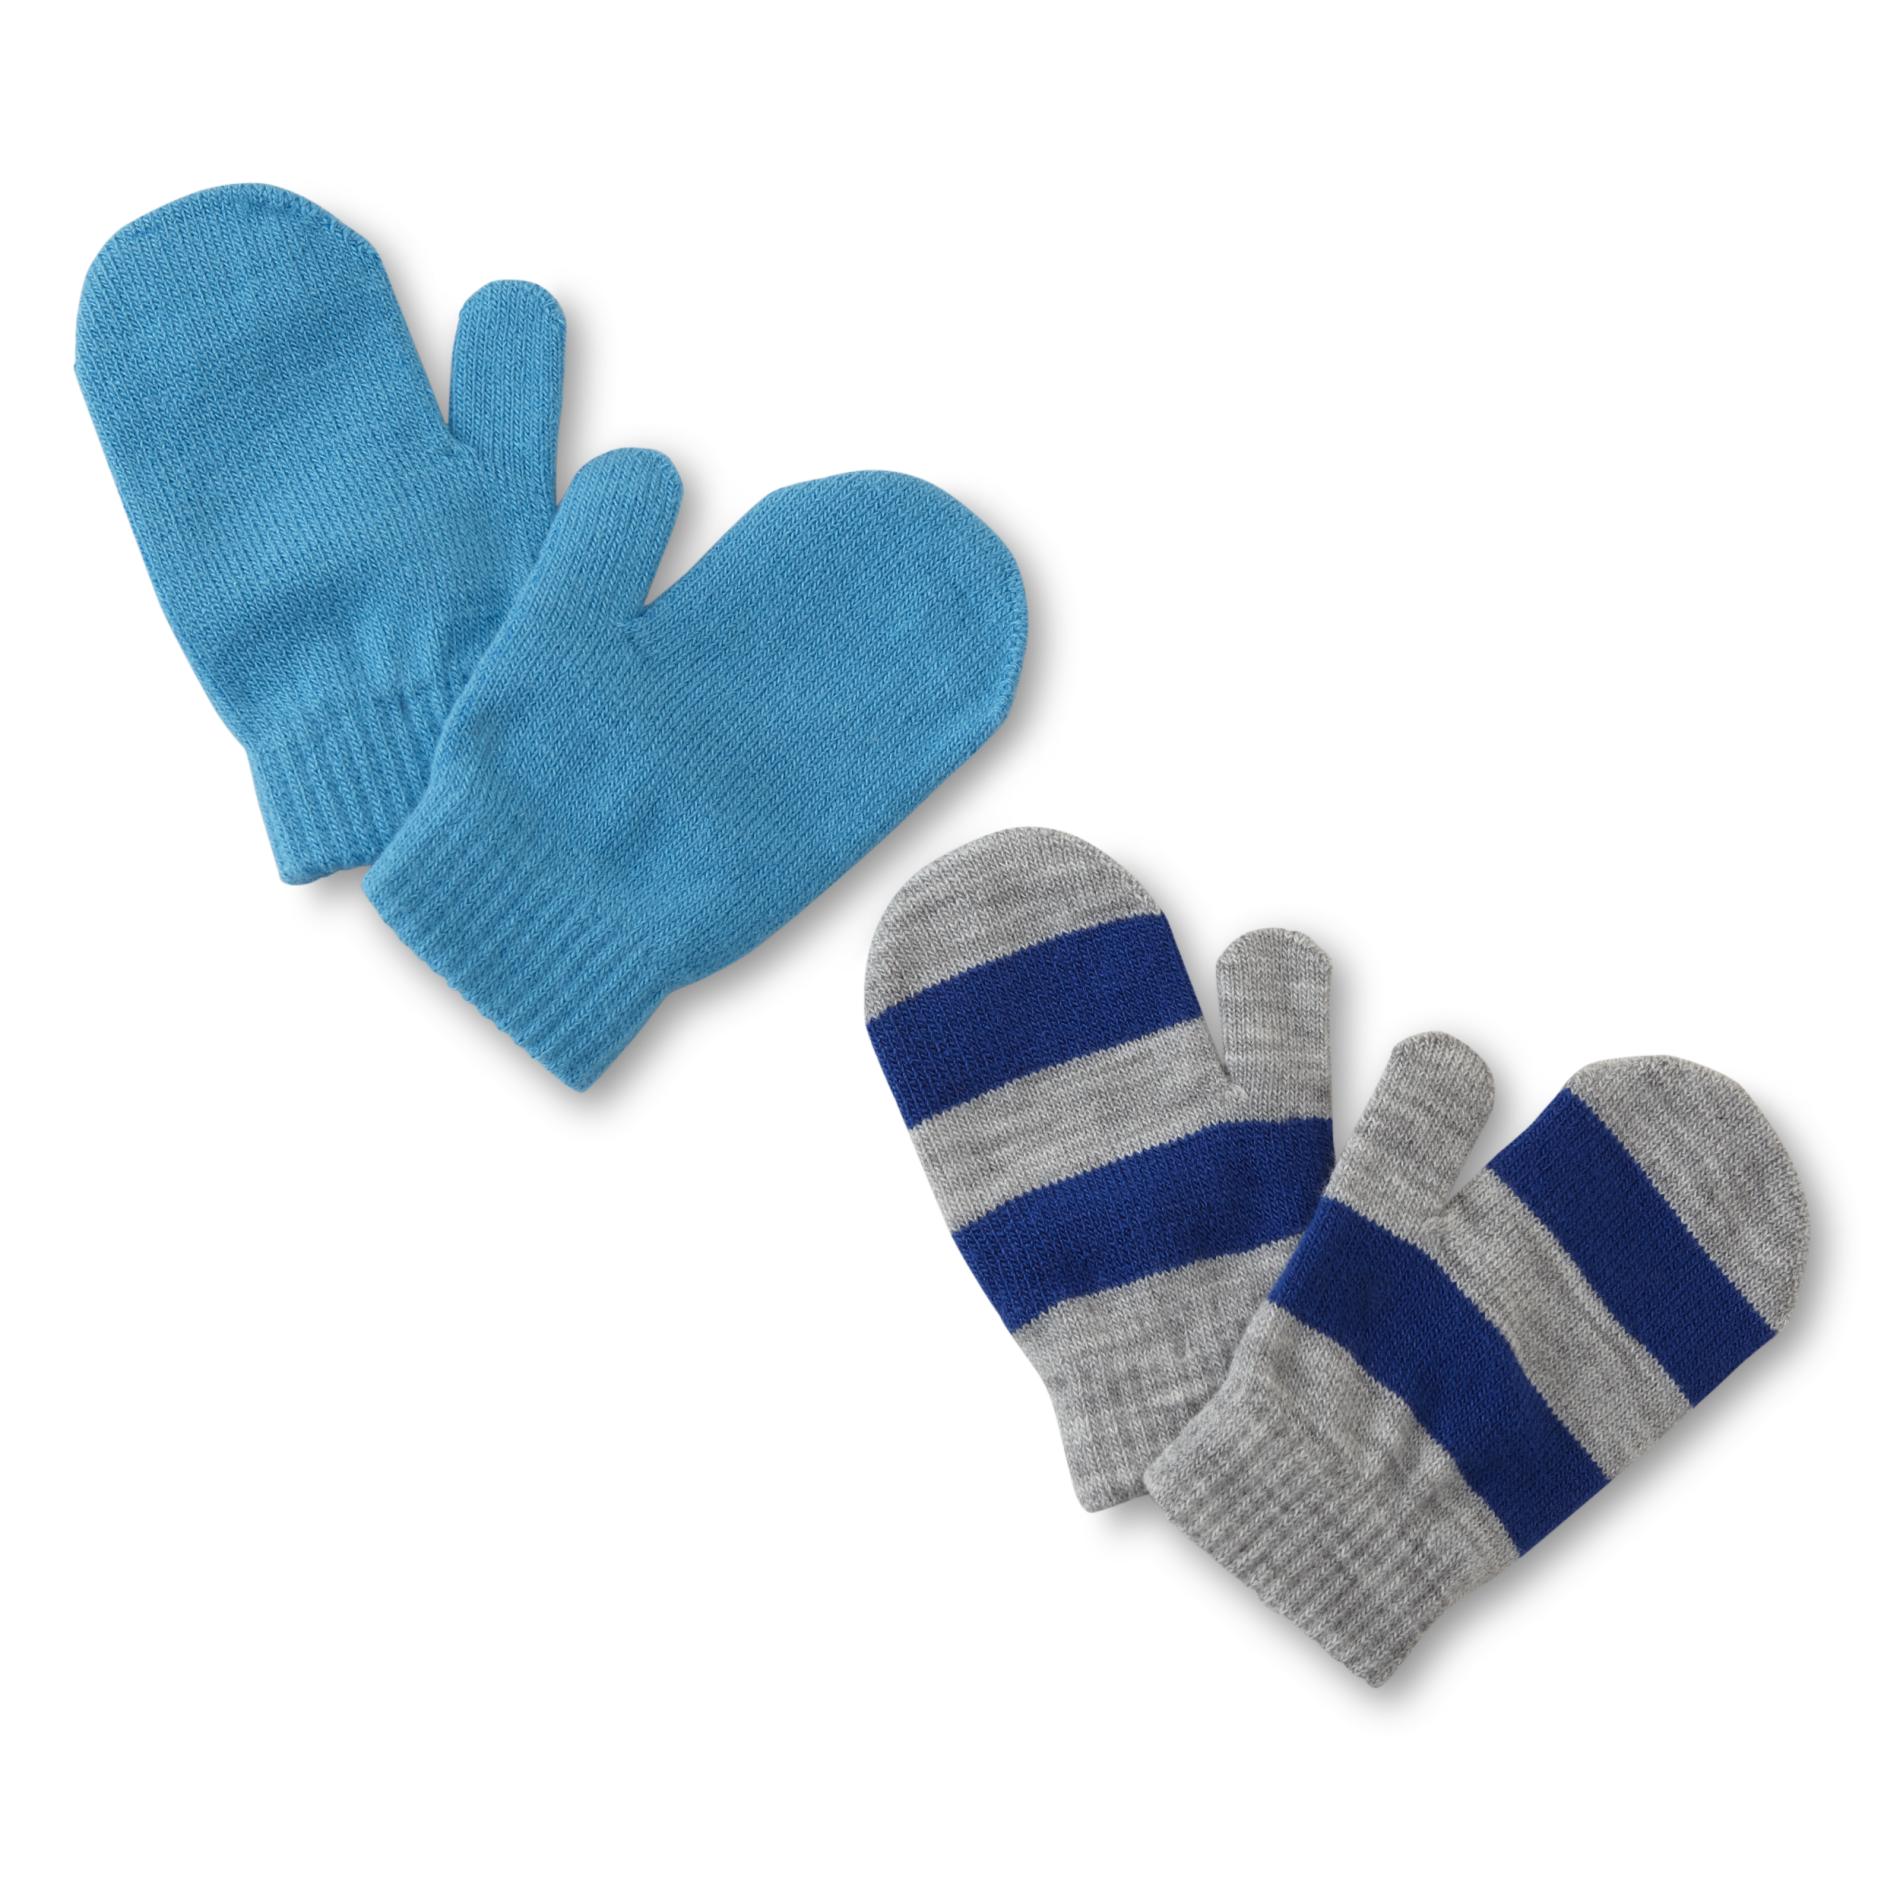 Simply Styled Toddler Boys' 2-Pairs Mittens - Solid & Striped